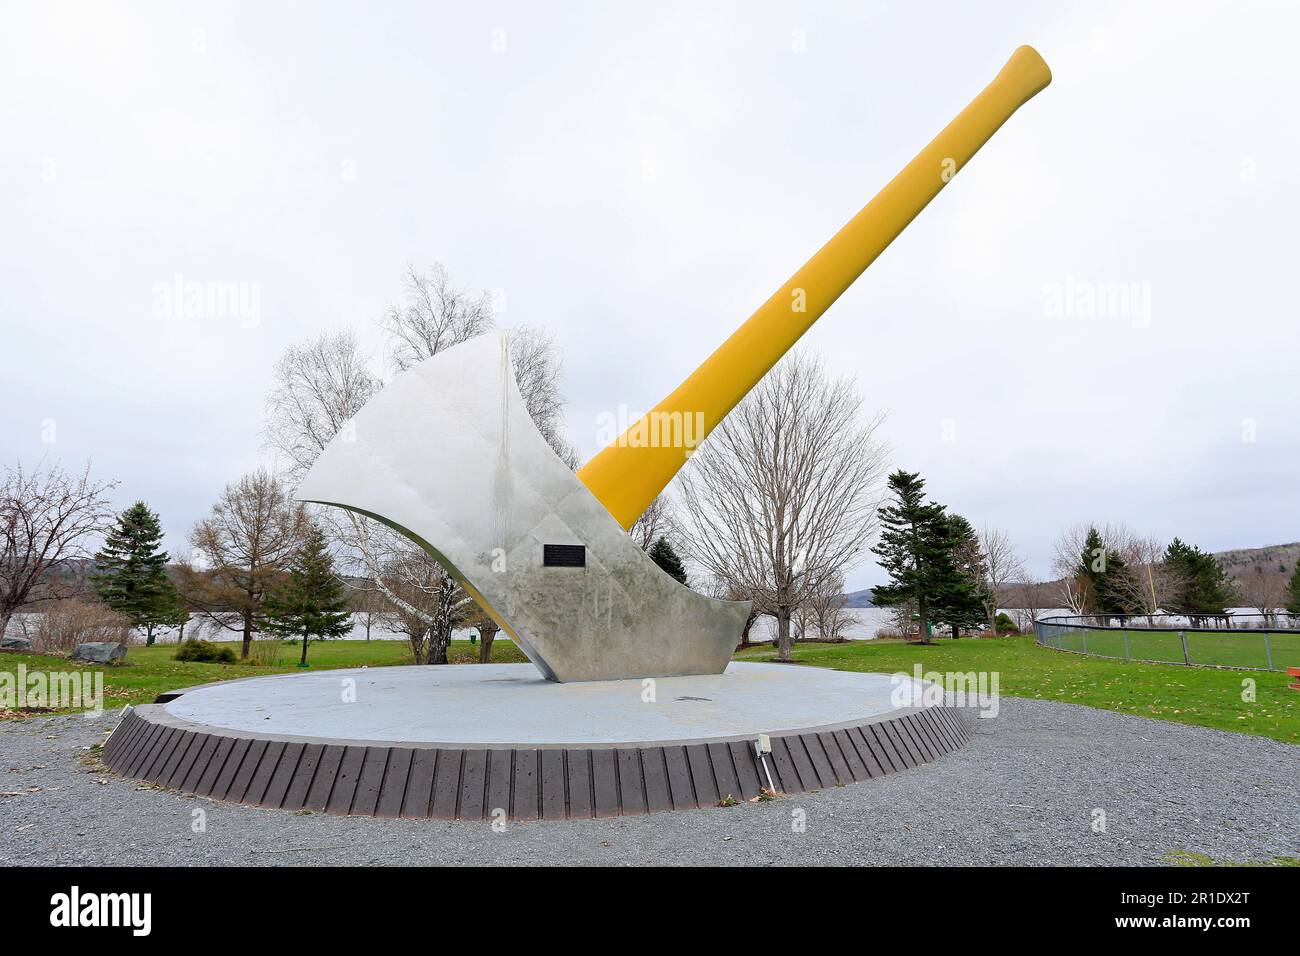 The world's largest axe is located in Nackawic, New Brunswick, Canada. The axe stands 15 metres tall and weighs over 55 tons. The axe-head is 7 metres Stock Photo